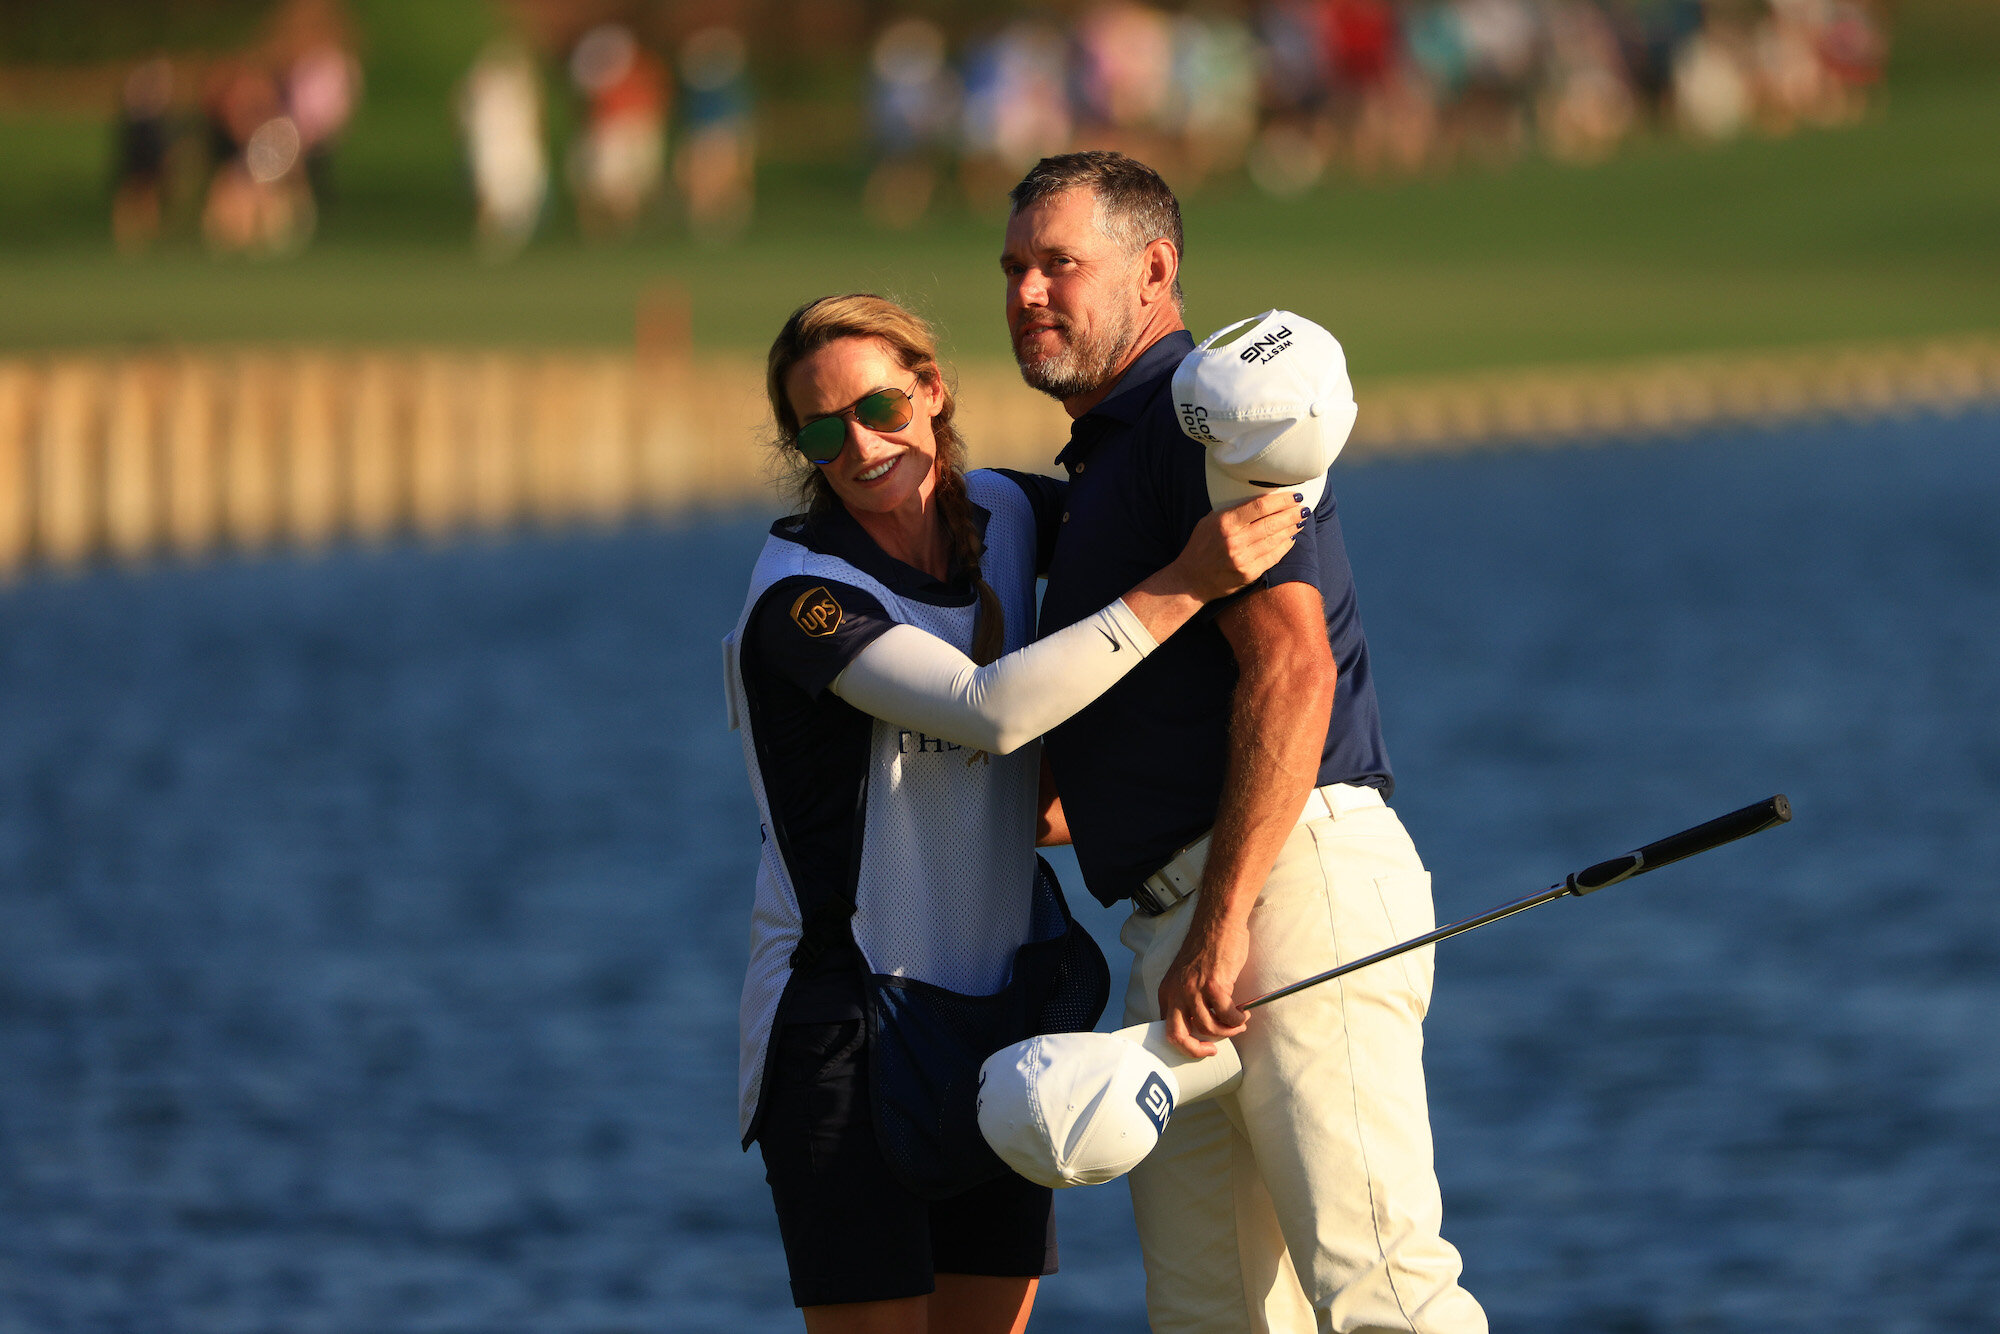  PONTE VEDRA BEACH, FLORIDA - MARCH 14: Lee Westwood of England kisses his caddie and partner Helen Storey after finishing on the 18th green during the final round of THE PLAYERS Championship on THE PLAYERS Stadium Course at TPC Sawgrass on March 14,